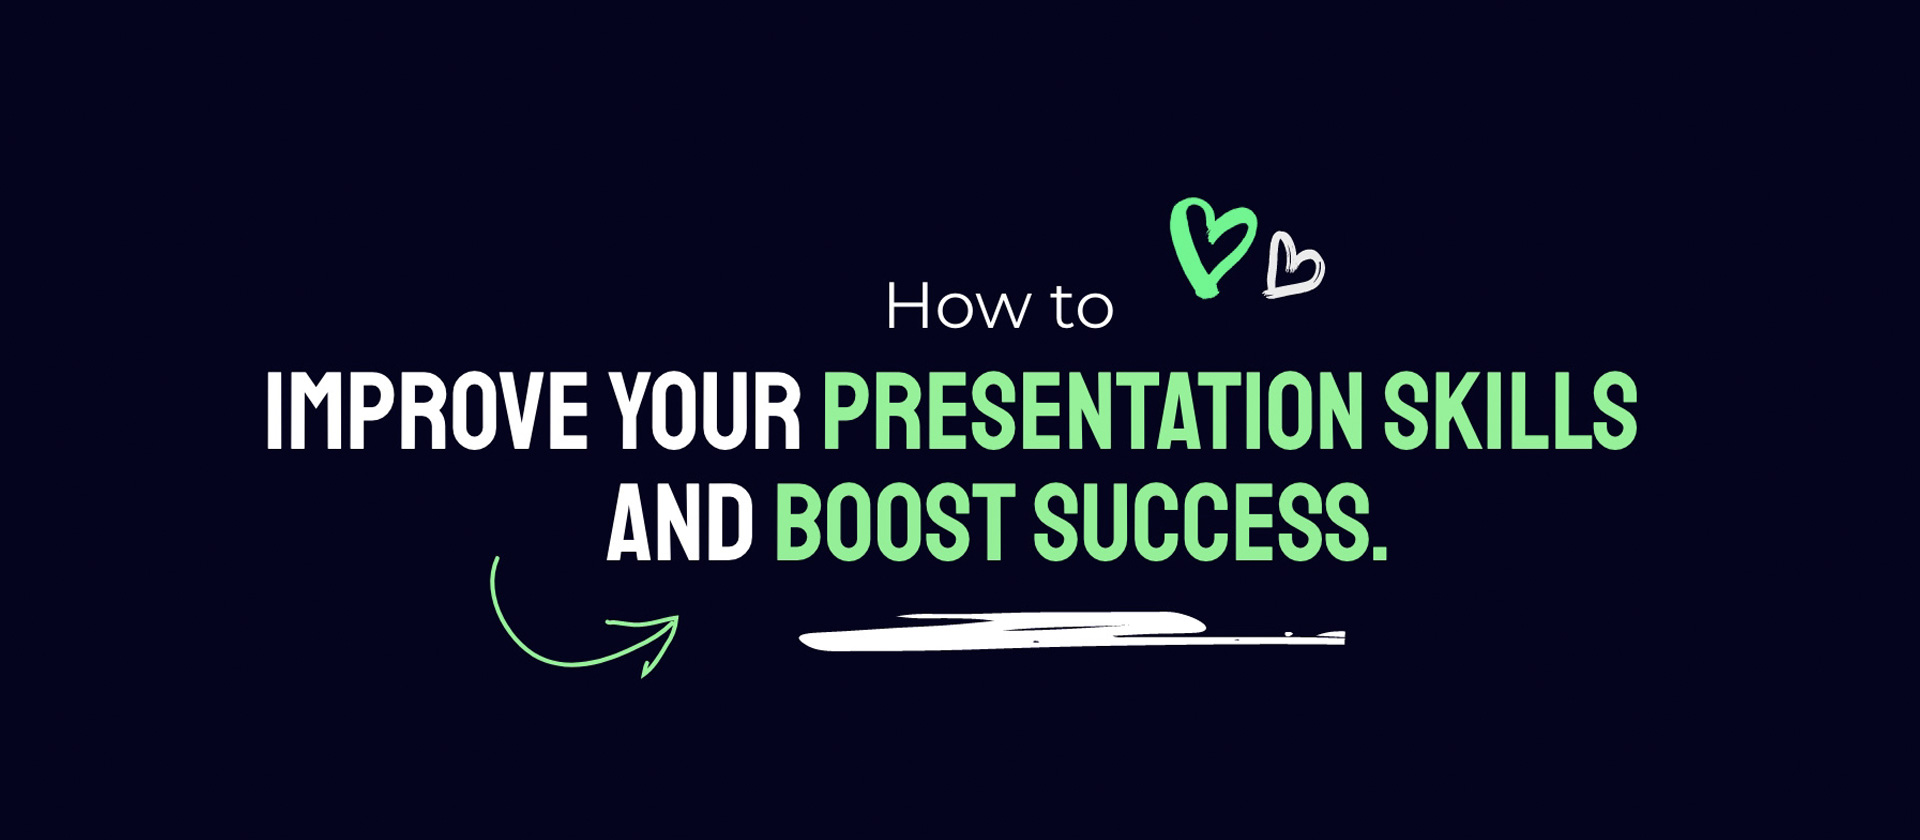 How to improve your presentation skills and boost success.